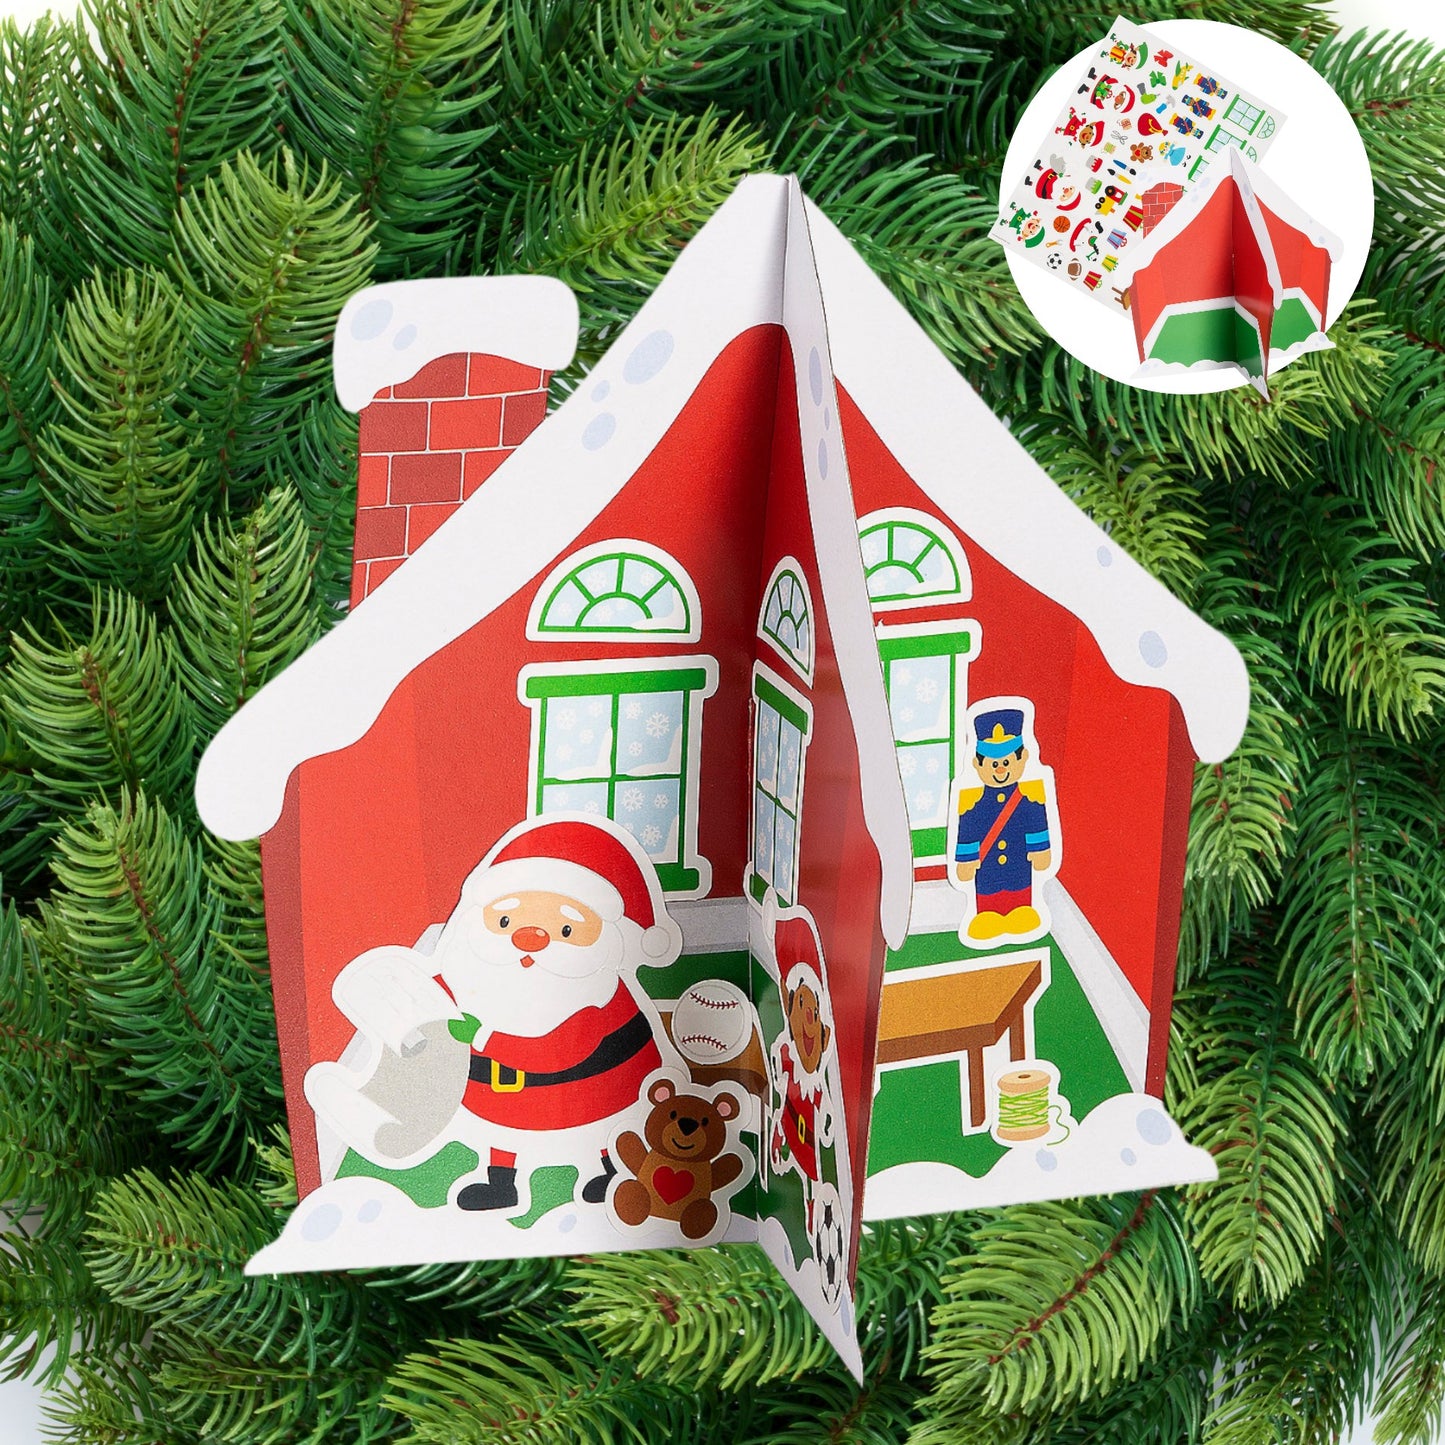 Ivy Kids Holiday Fun Kit featuring The Night Before Christmas